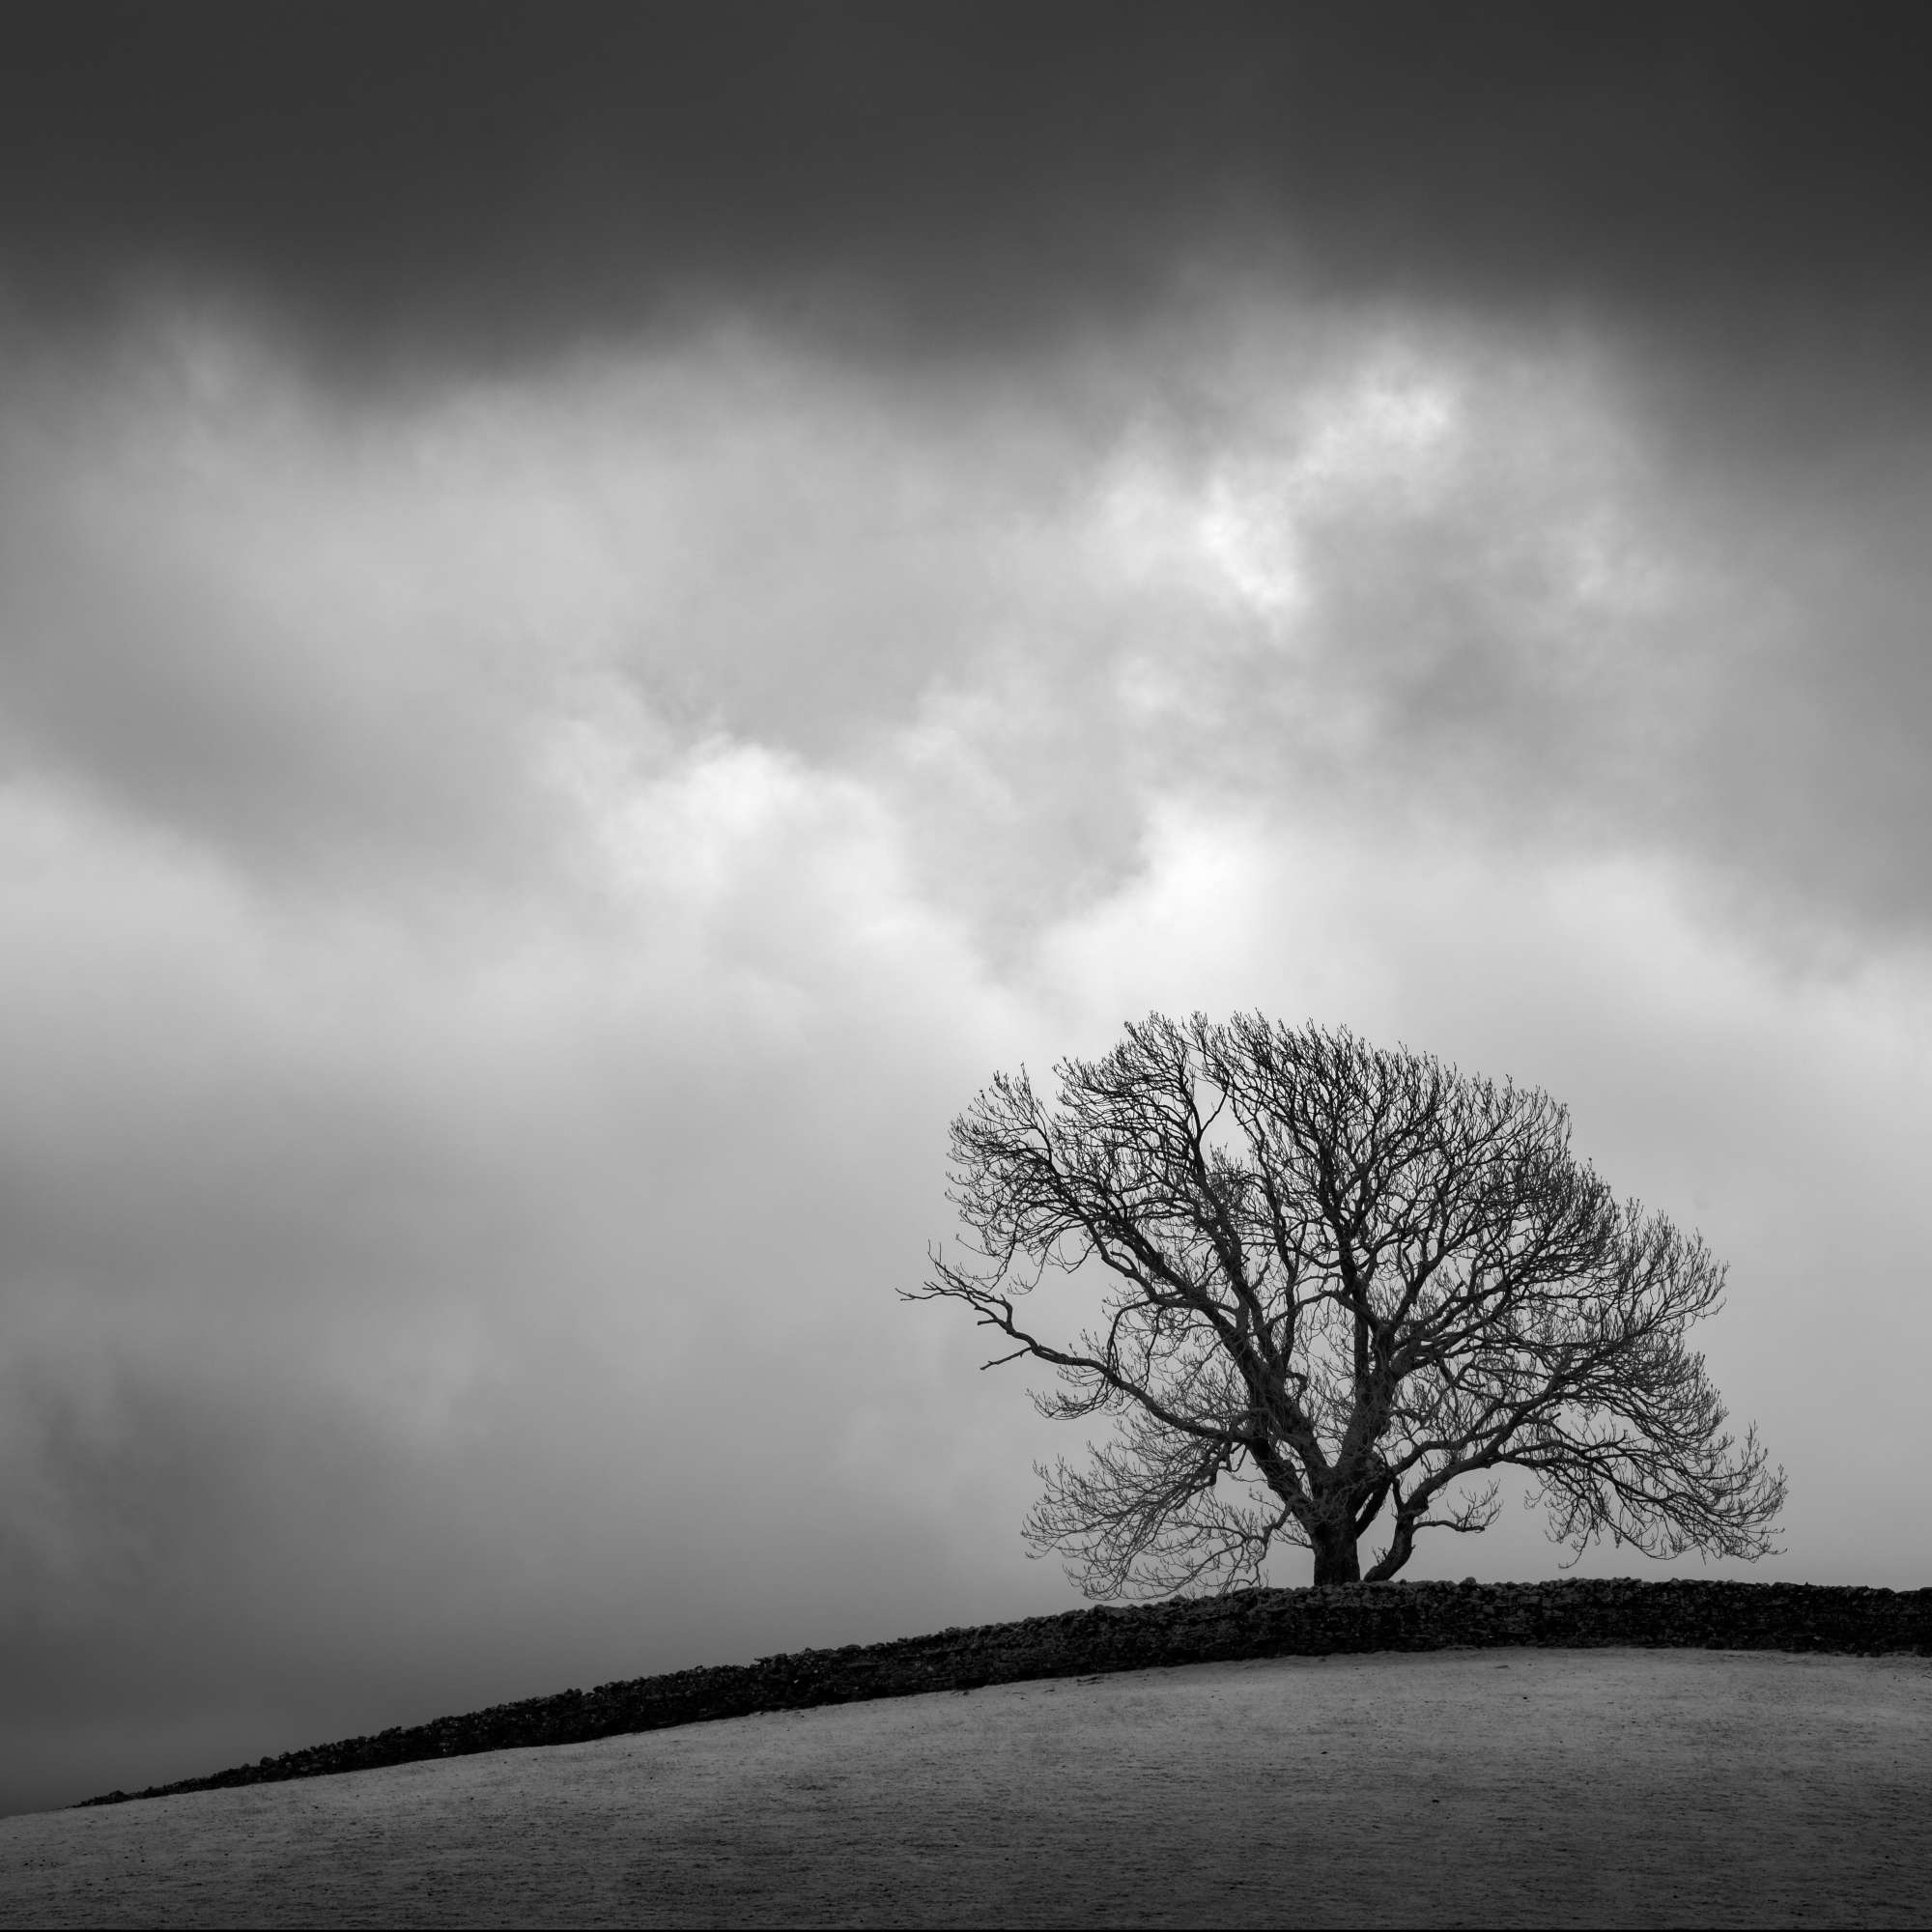 Stormy weather in Infrared Yorkshire Dales Michael Pilkington aspect2i